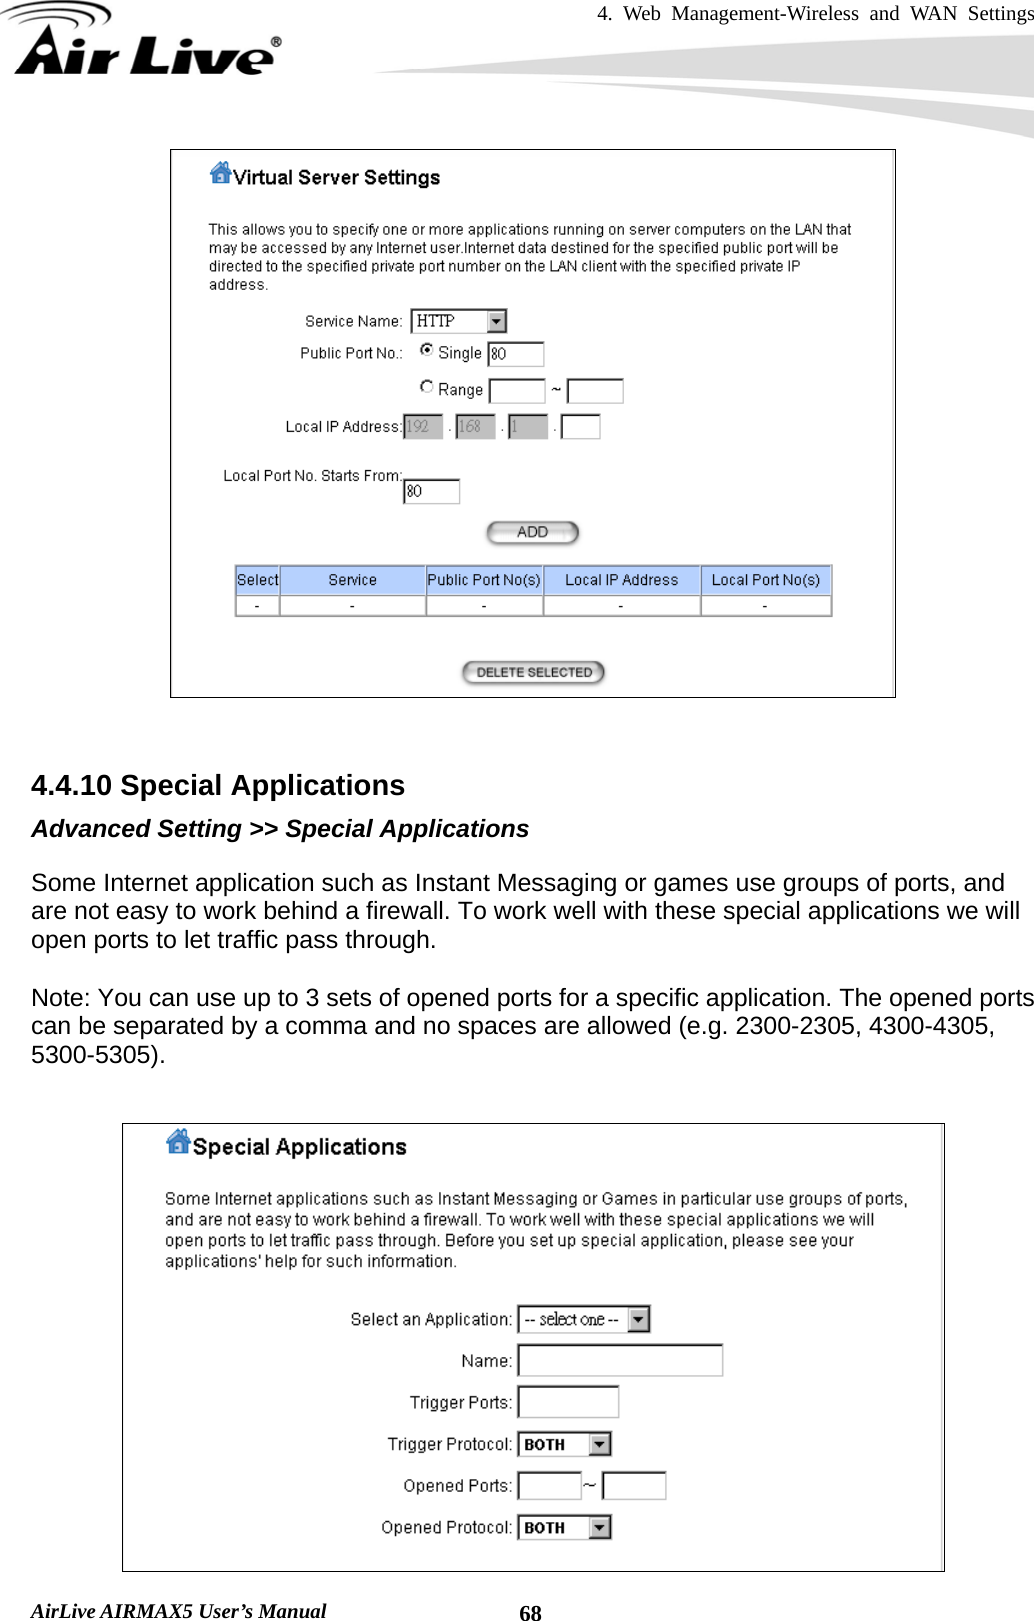 4. Web Management-Wireless and WAN Settings   AirLive AIRMAX5 User’s Manual  68   4.4.10 Special Applications Advanced Setting &gt;&gt; Special Applications Some Internet application such as Instant Messaging or games use groups of ports, and are not easy to work behind a firewall. To work well with these special applications we will open ports to let traffic pass through.    Note: You can use up to 3 sets of opened ports for a specific application. The opened ports can be separated by a comma and no spaces are allowed (e.g. 2300-2305, 4300-4305, 5300-5305).   